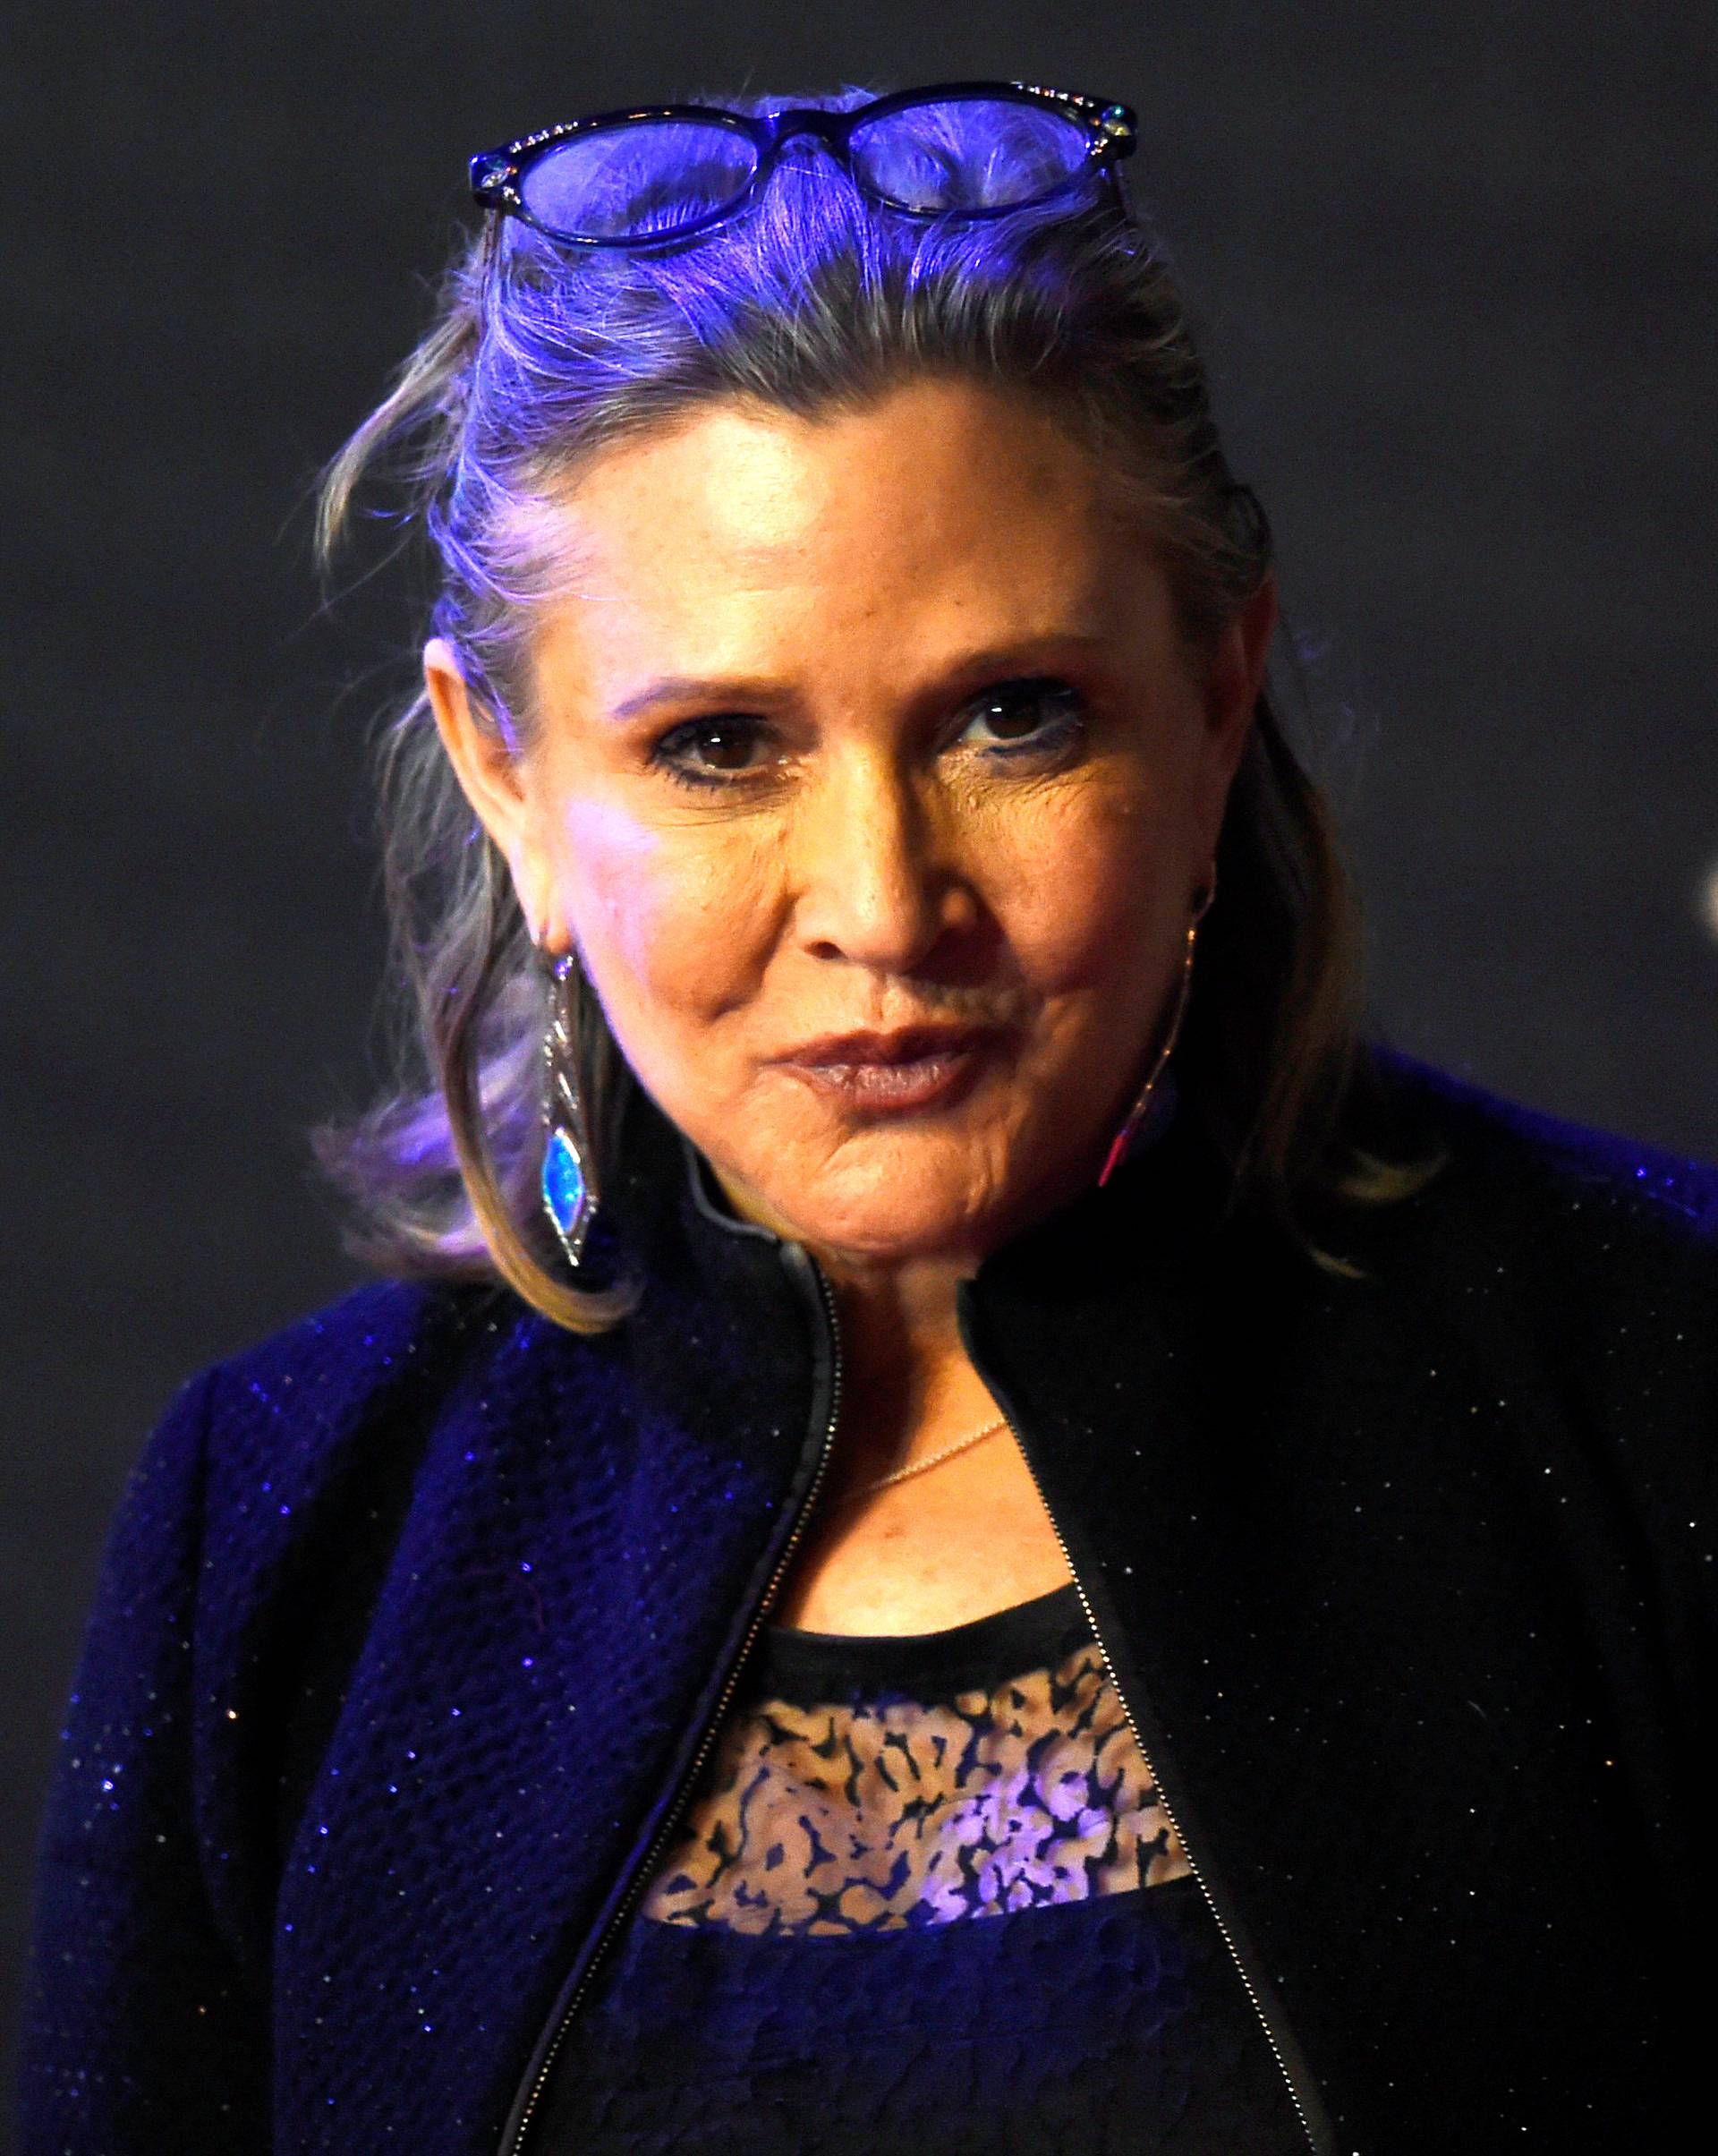 FILE PHOTO - Carrie Fisher poses for cameras as she arrives at the European Premiere of Star Wars, The Force Awakens in Leicester Square, London